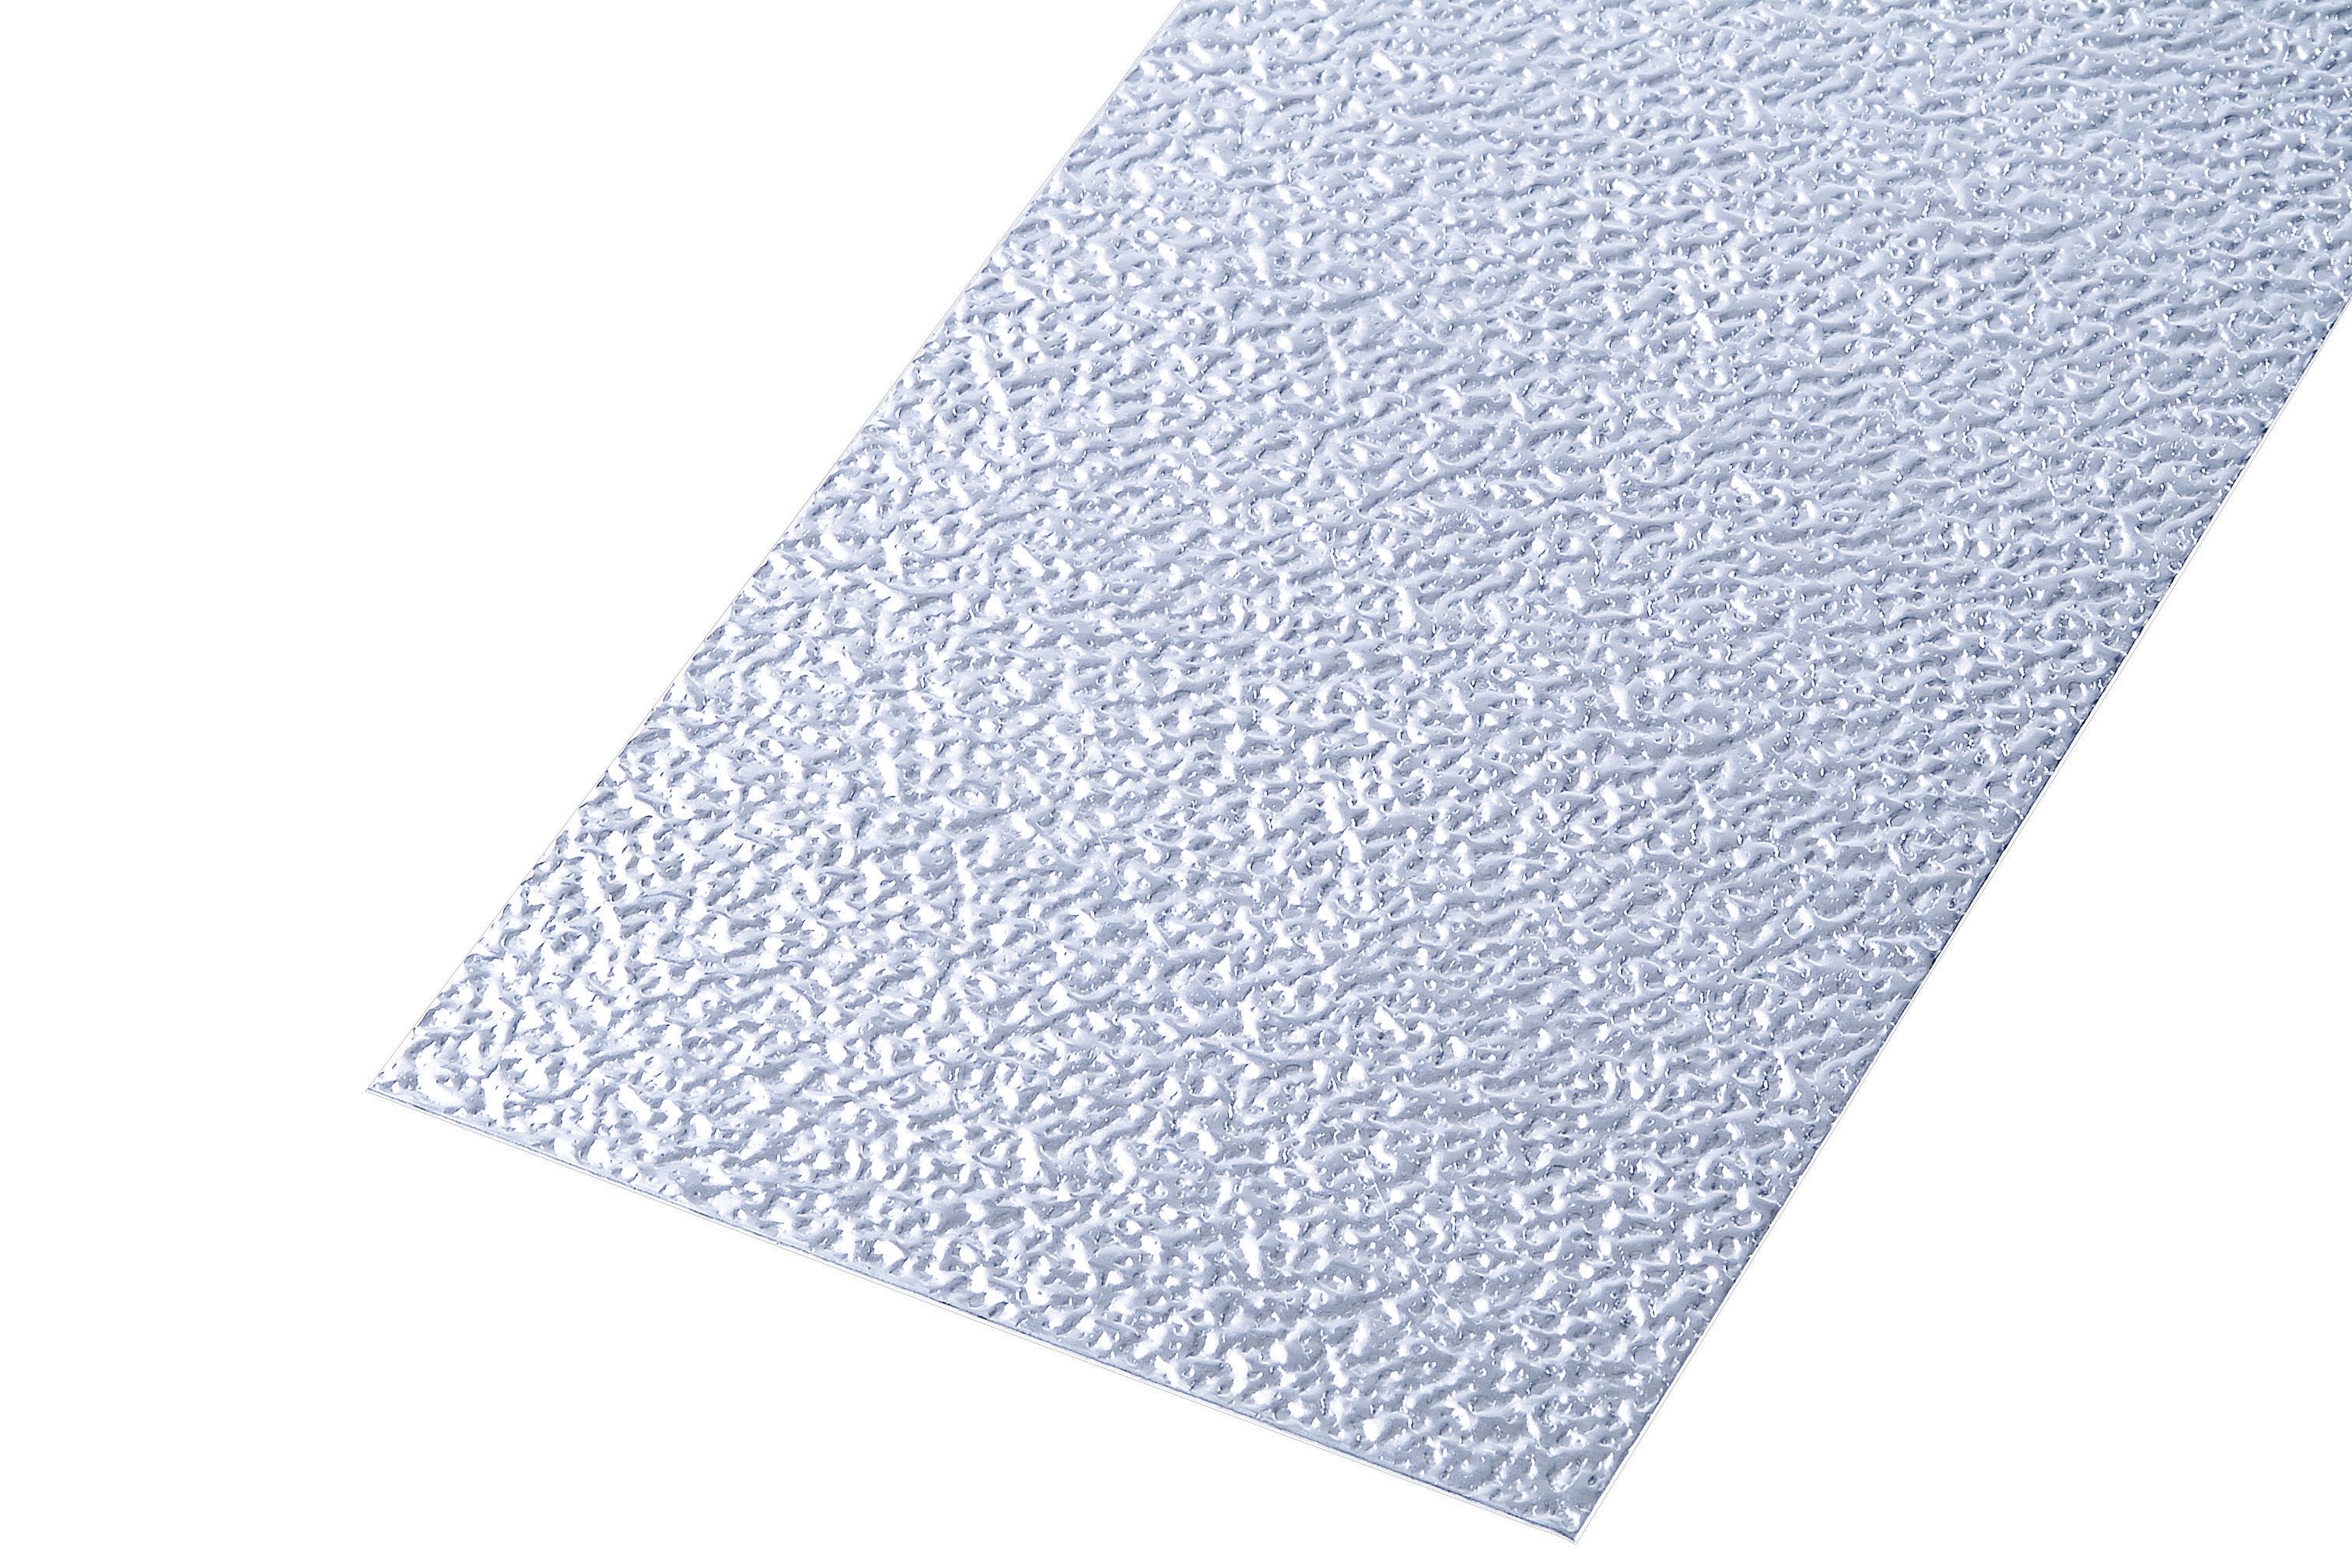 Rothley Uncoated Aluminium Roughcast Effect Metal Sheet - 120 x 1000mm